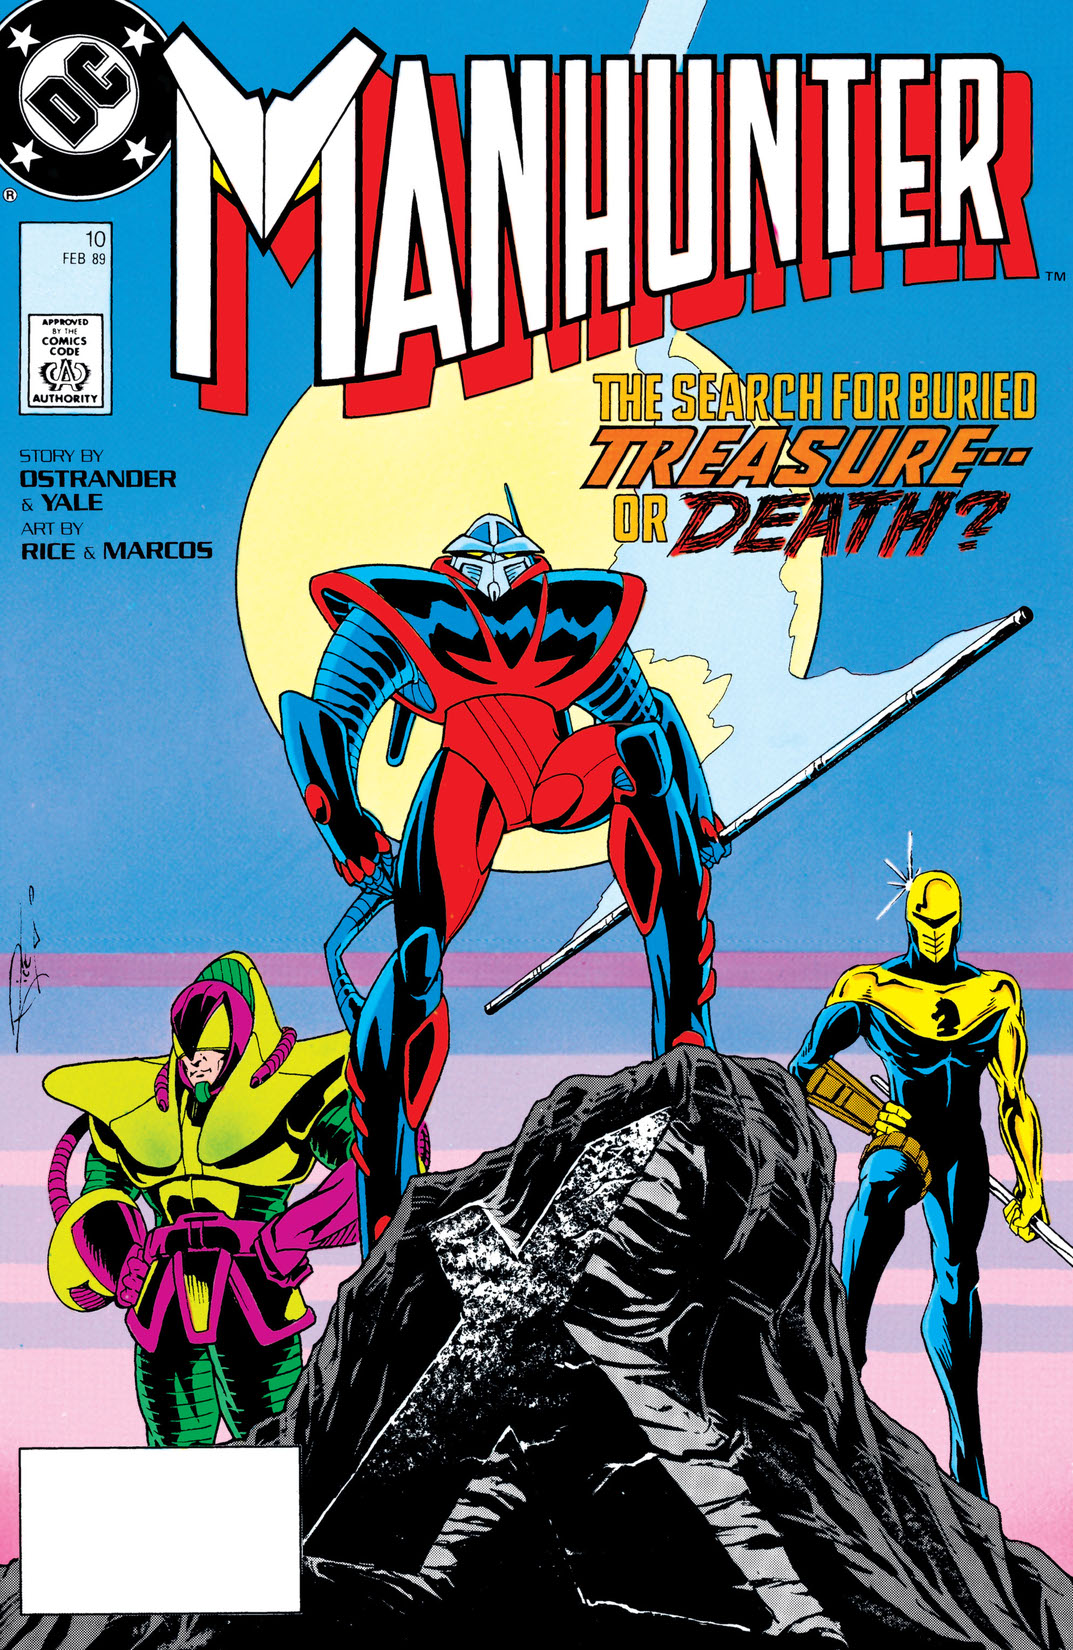 Manhunter (1988-) #10 preview images